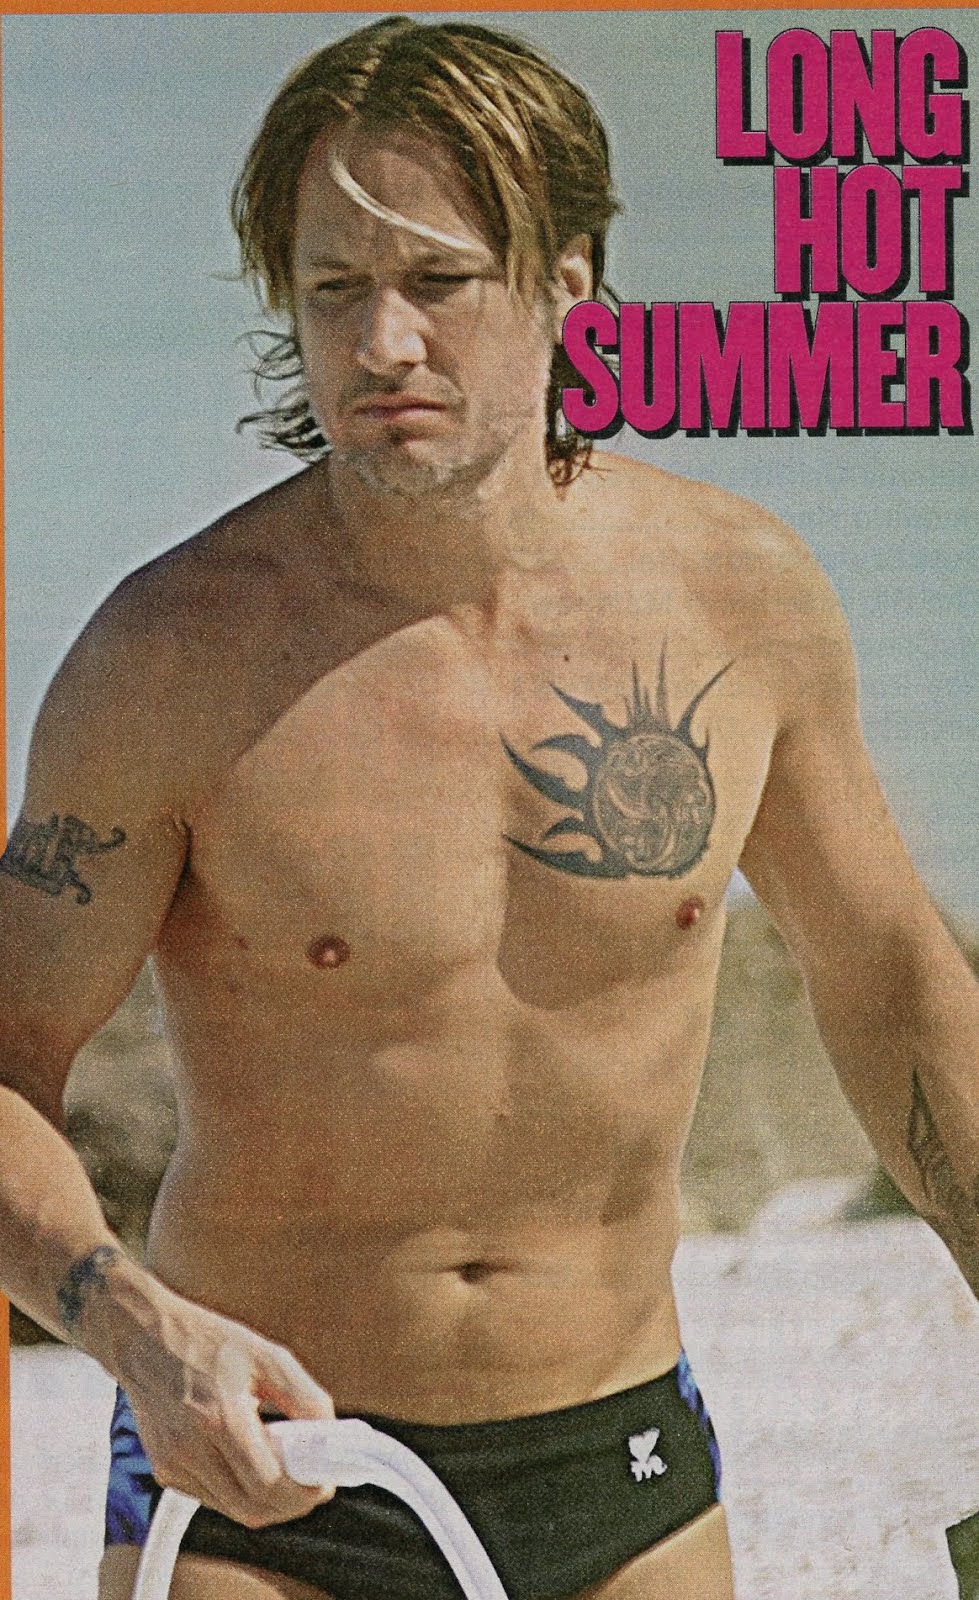 Keith Urban in black speedos at the beach: Hot Musician's hot bod.